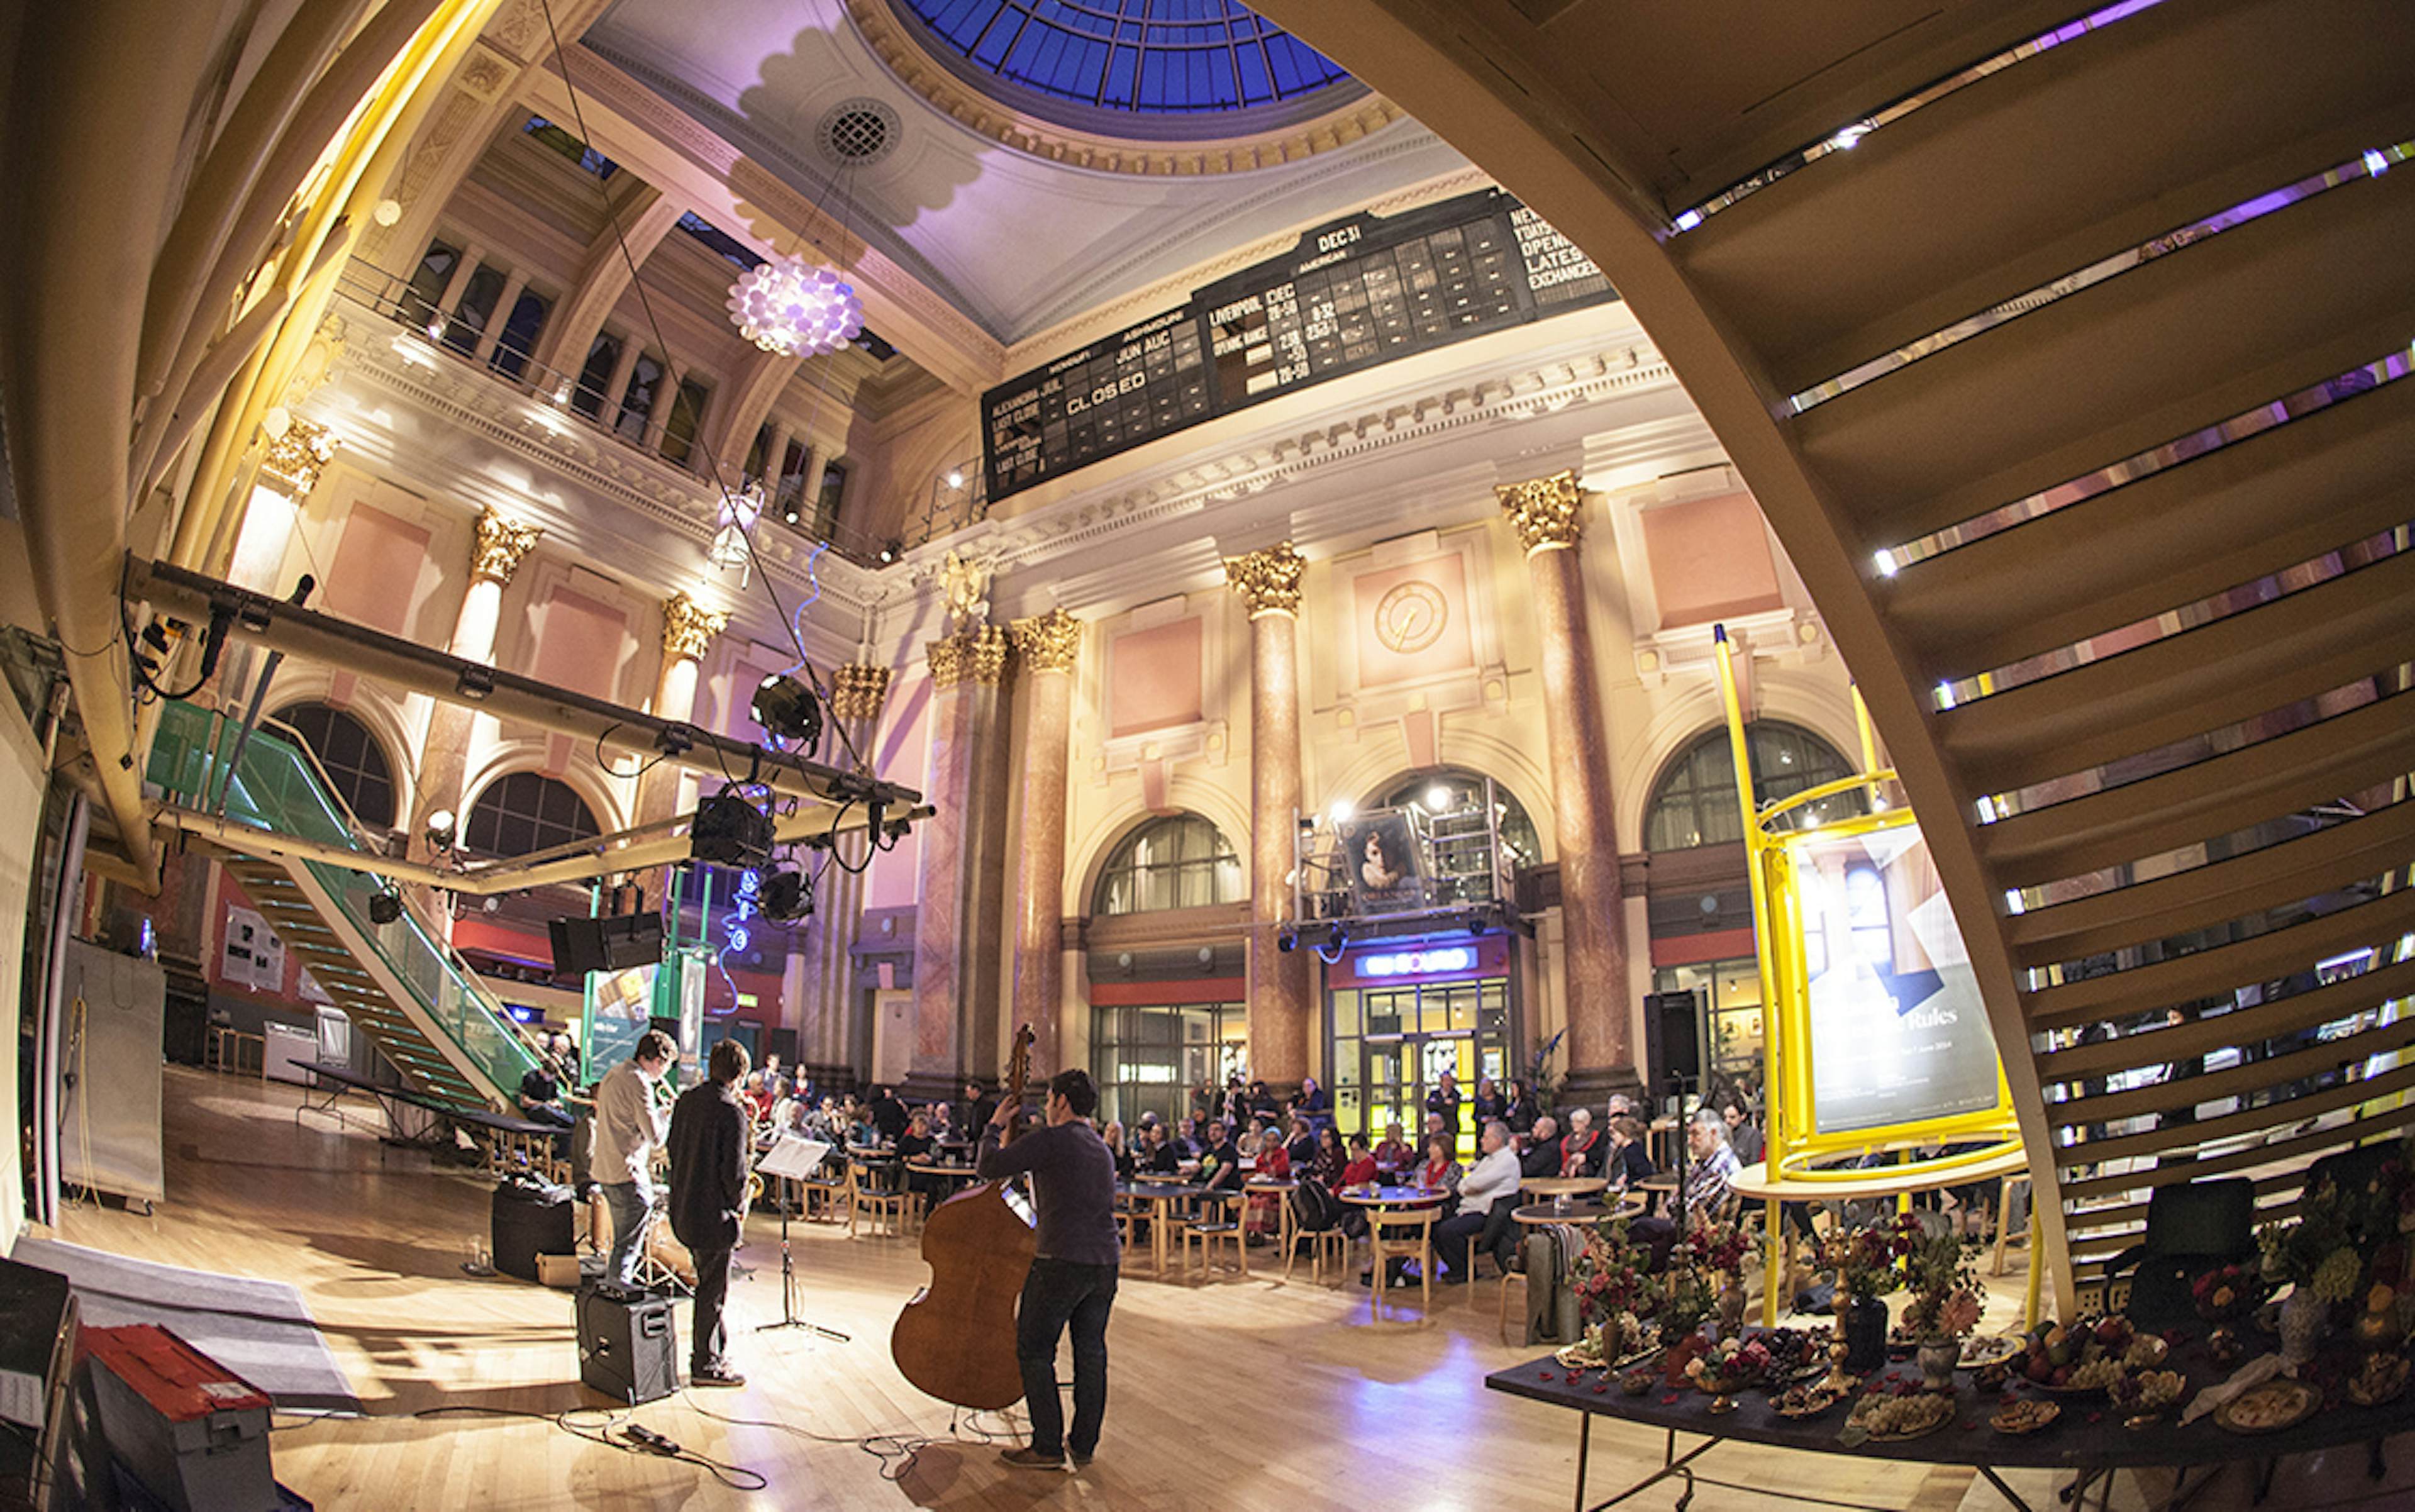 Royal Exchange Theatre - Great Hall   image 1